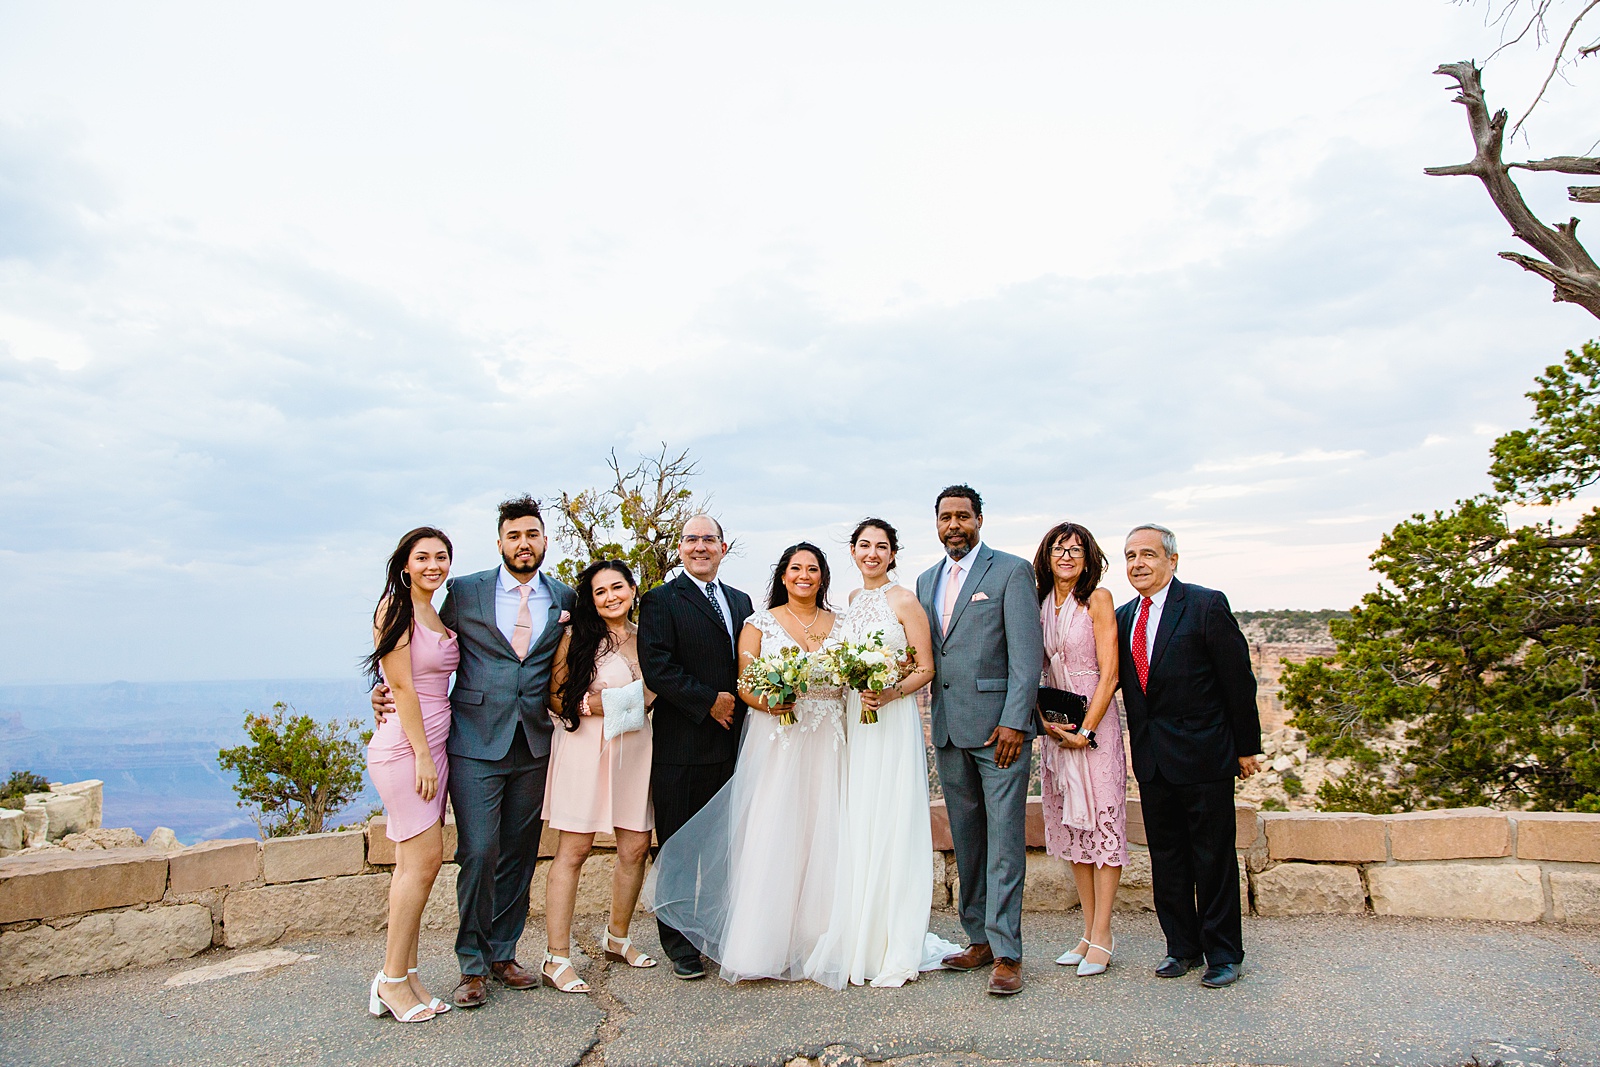 Brides poses with their family at her Grand Canyon Elopement by Arizona elopement photographer PMA Photography.